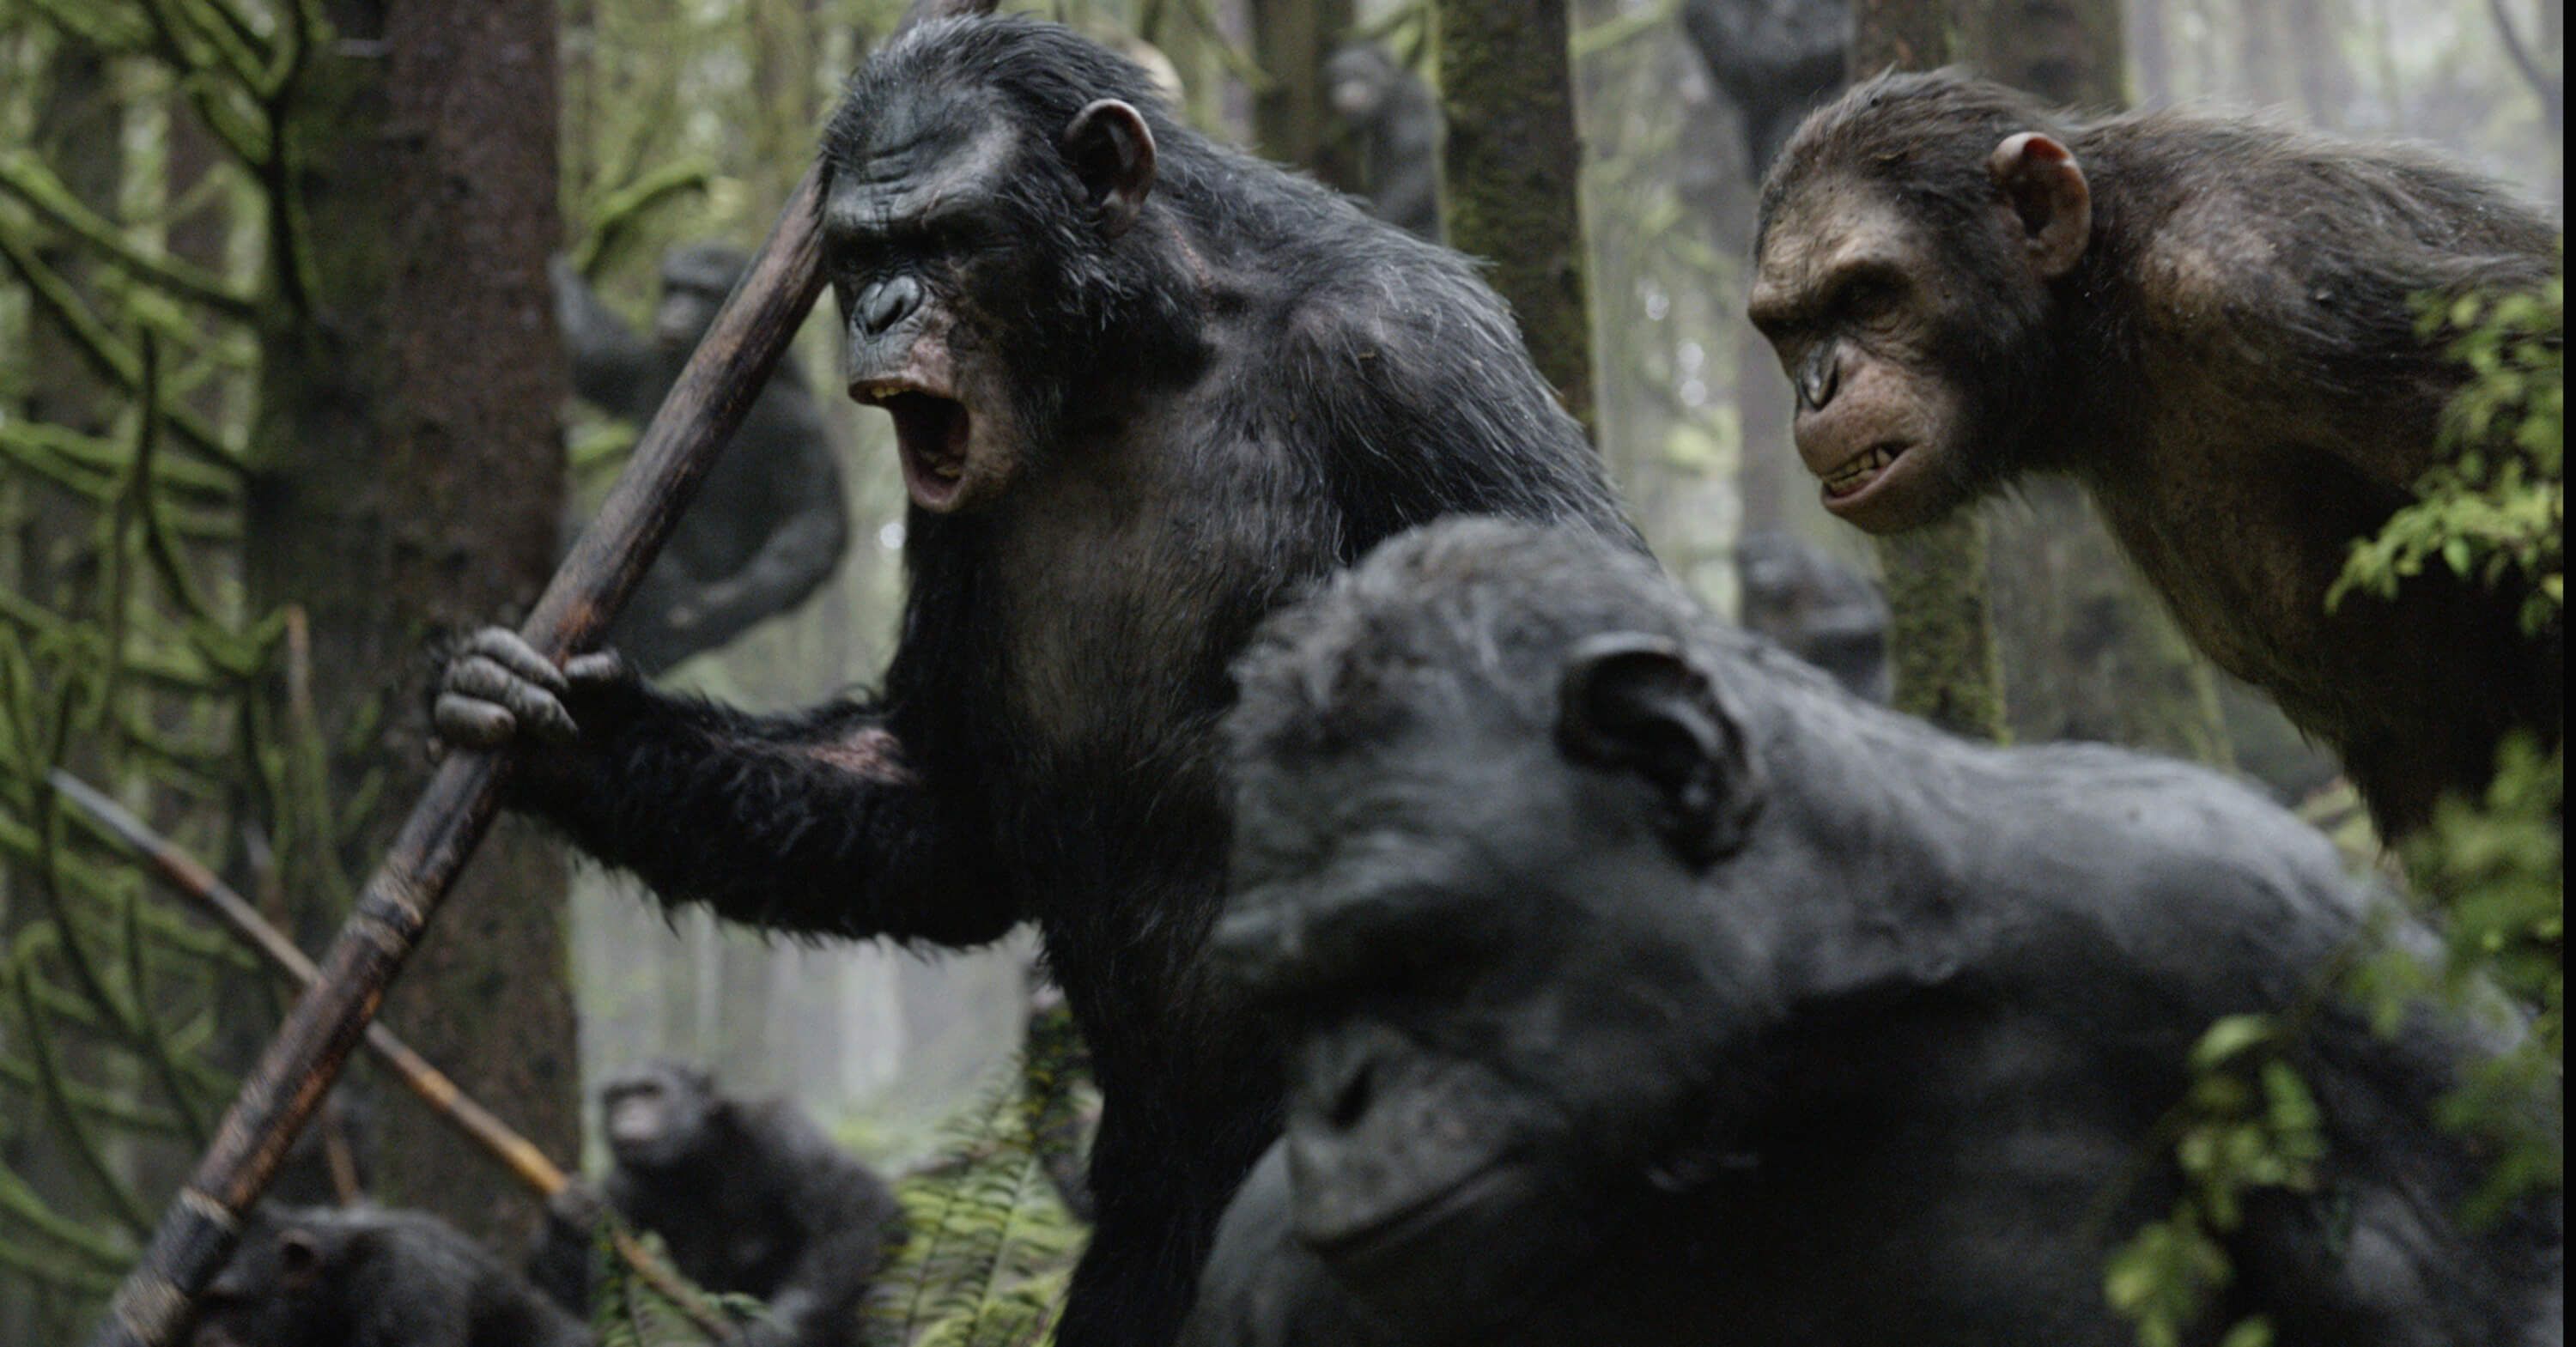 What Went on Behind the Scenes of 'Dawn of the Planet of the Apes